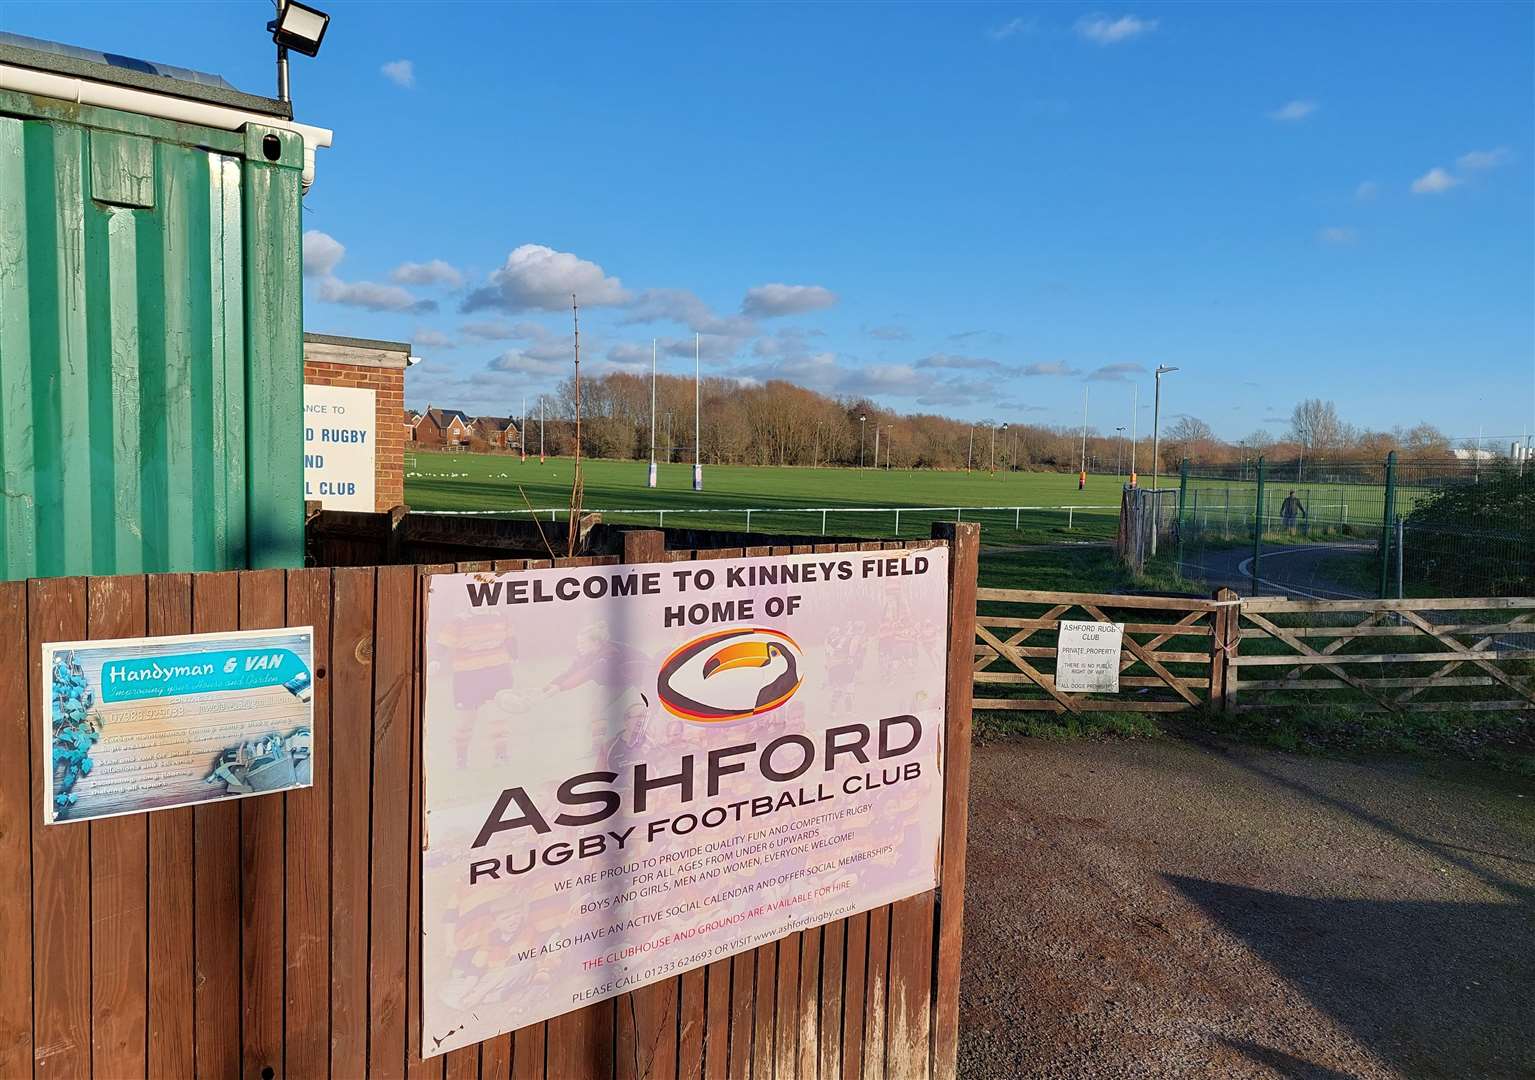 Ashford Rugby Club has applied for permission for overspill parking